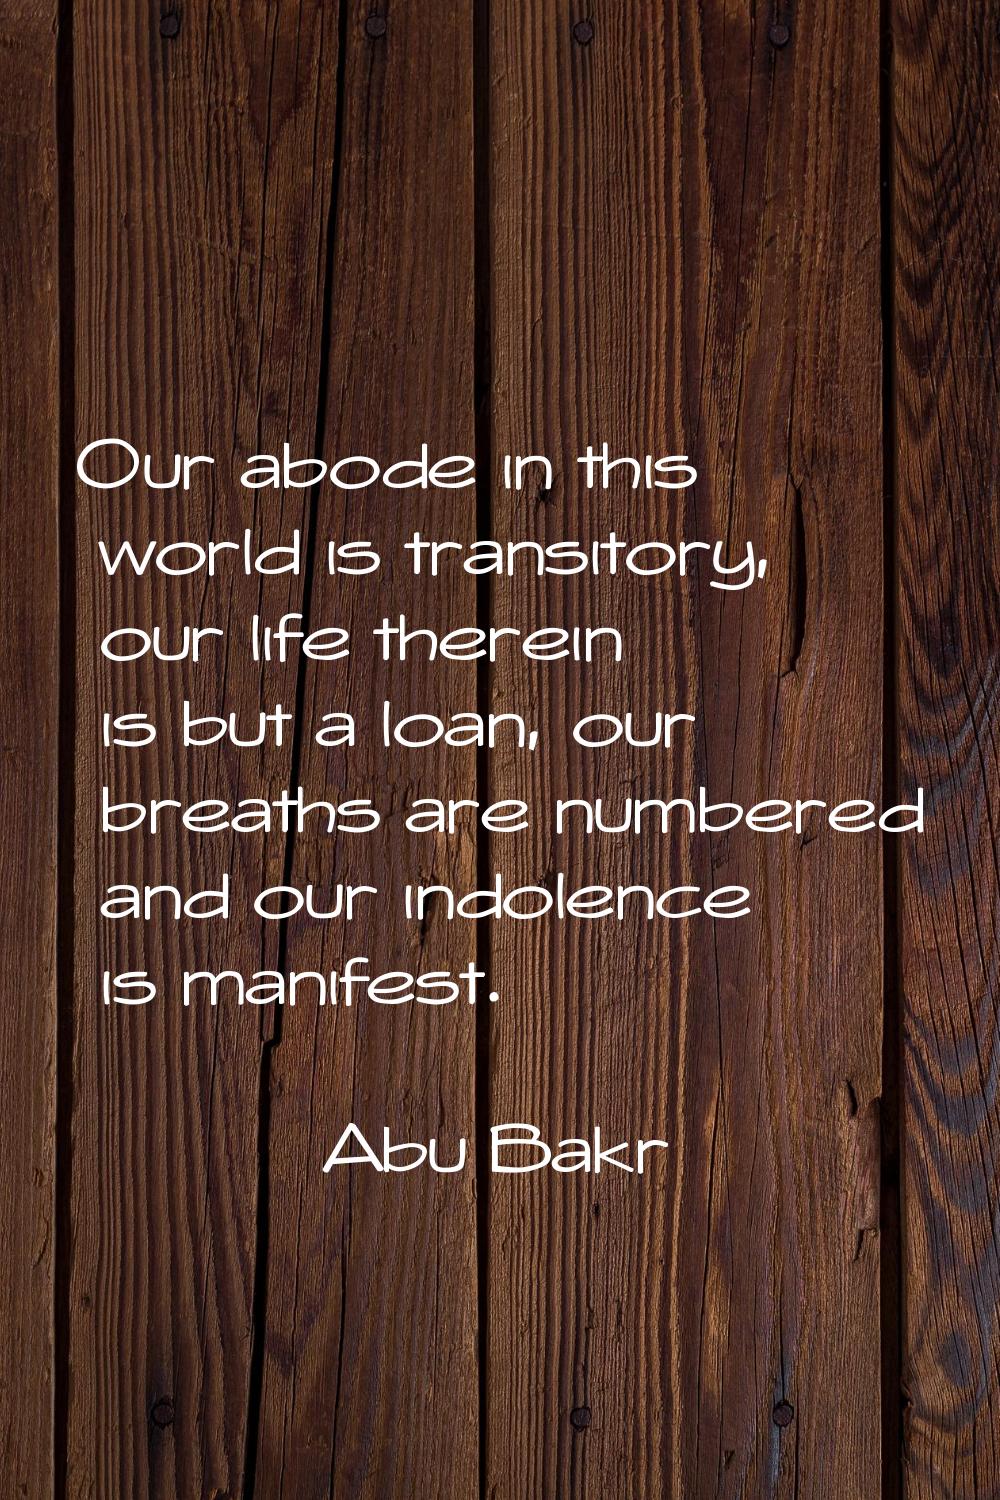 Our abode in this world is transitory, our life therein is but a loan, our breaths are numbered and